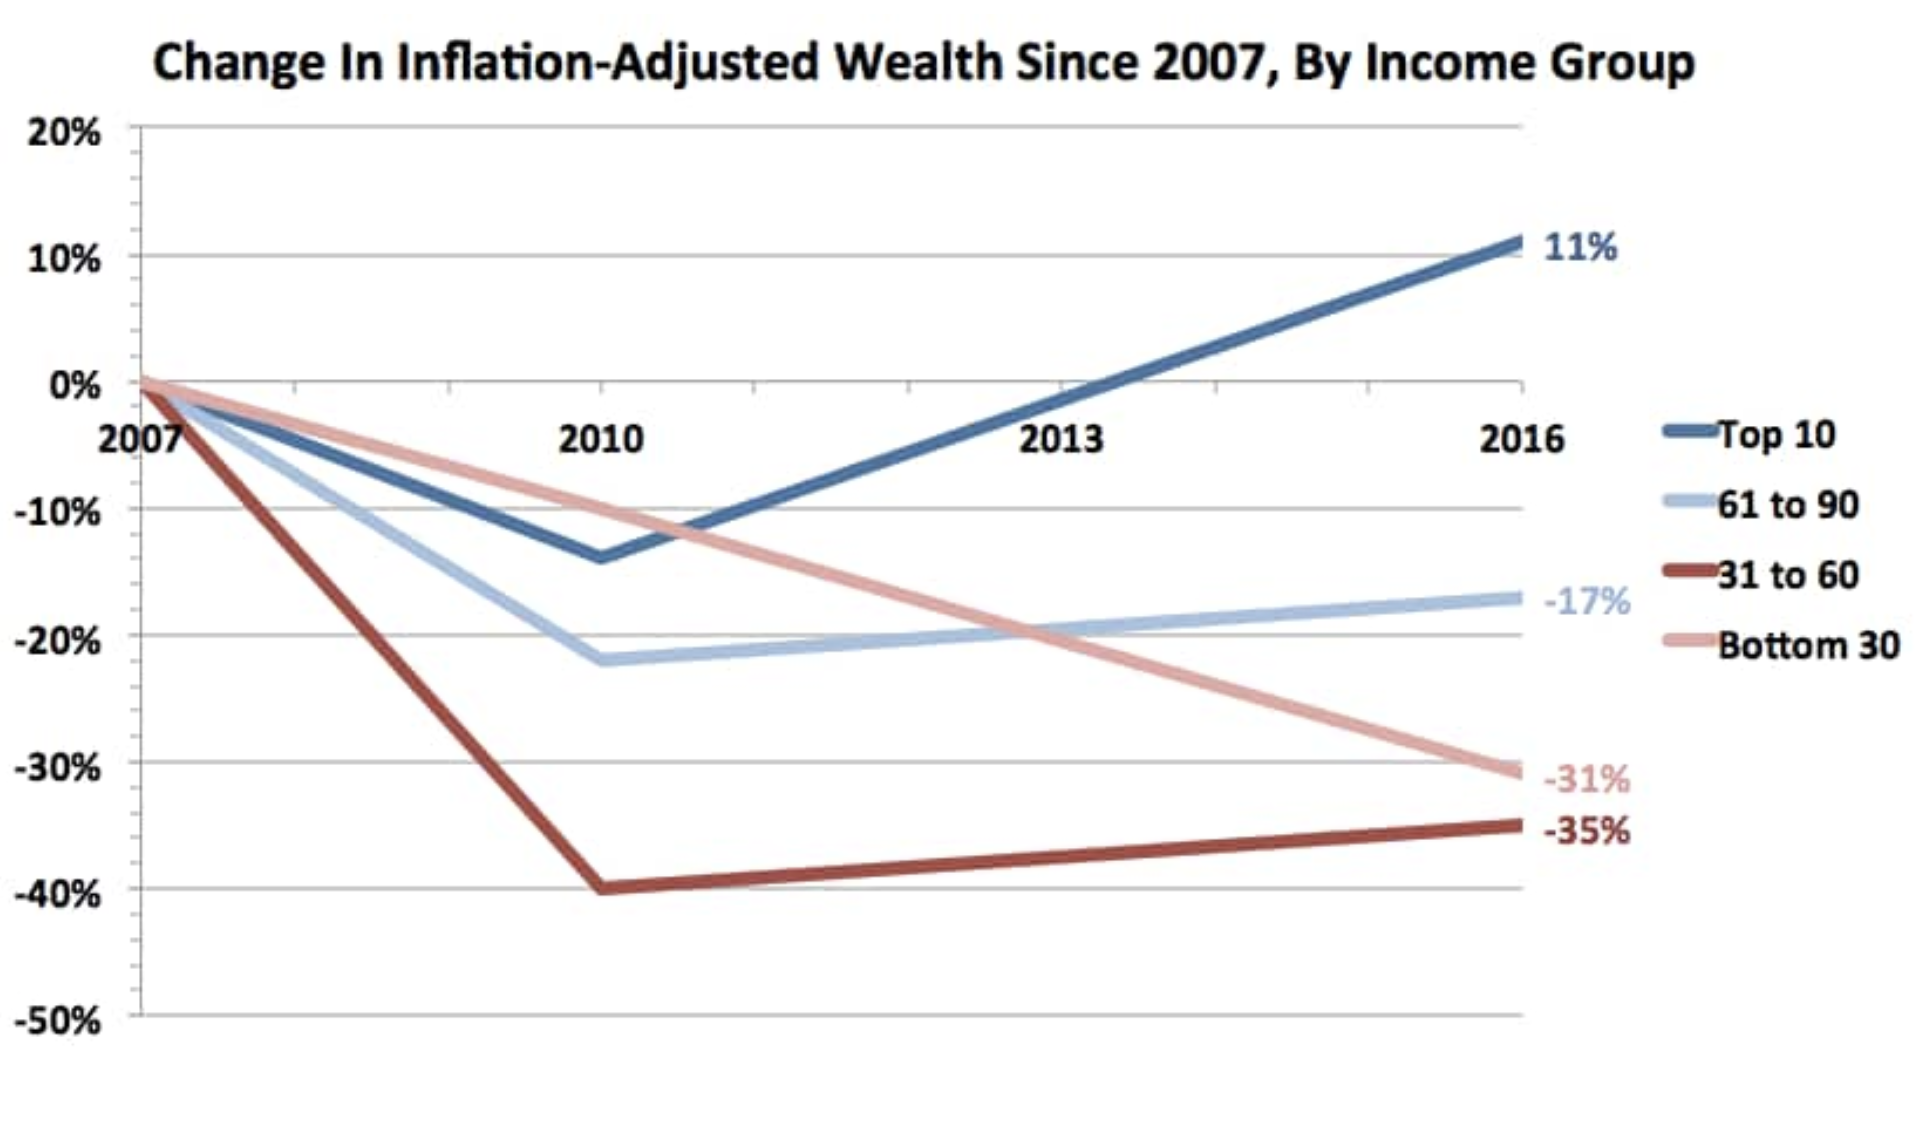 Change In Wealth By Income Post Qe, U.S. (Qe Money Infinity And Beyond)